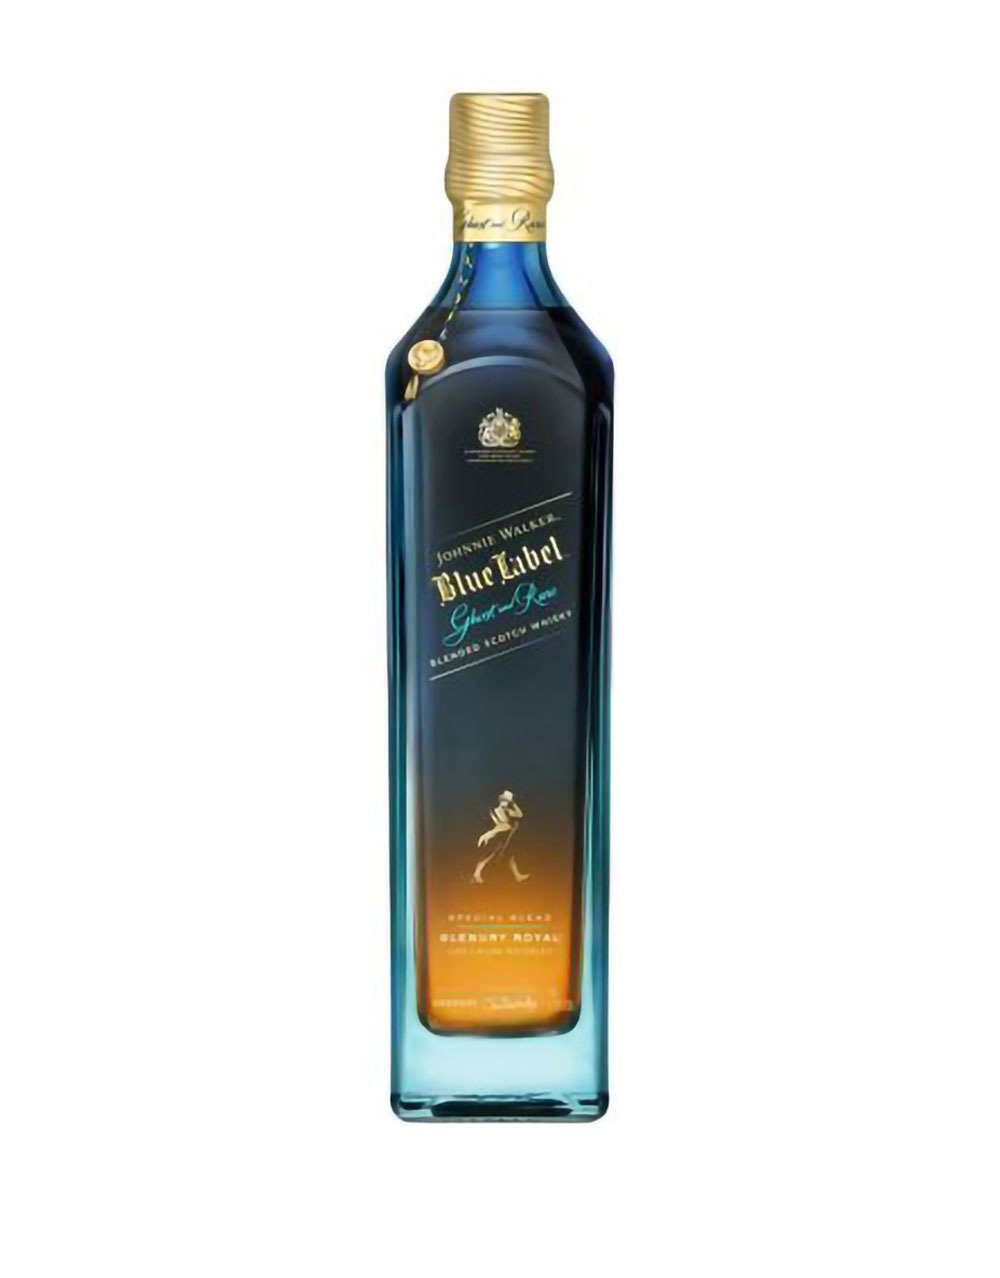 Johnnie Walker Blue Label Ghost and Rare Port Glenury Royal Blended Scotch Whisky